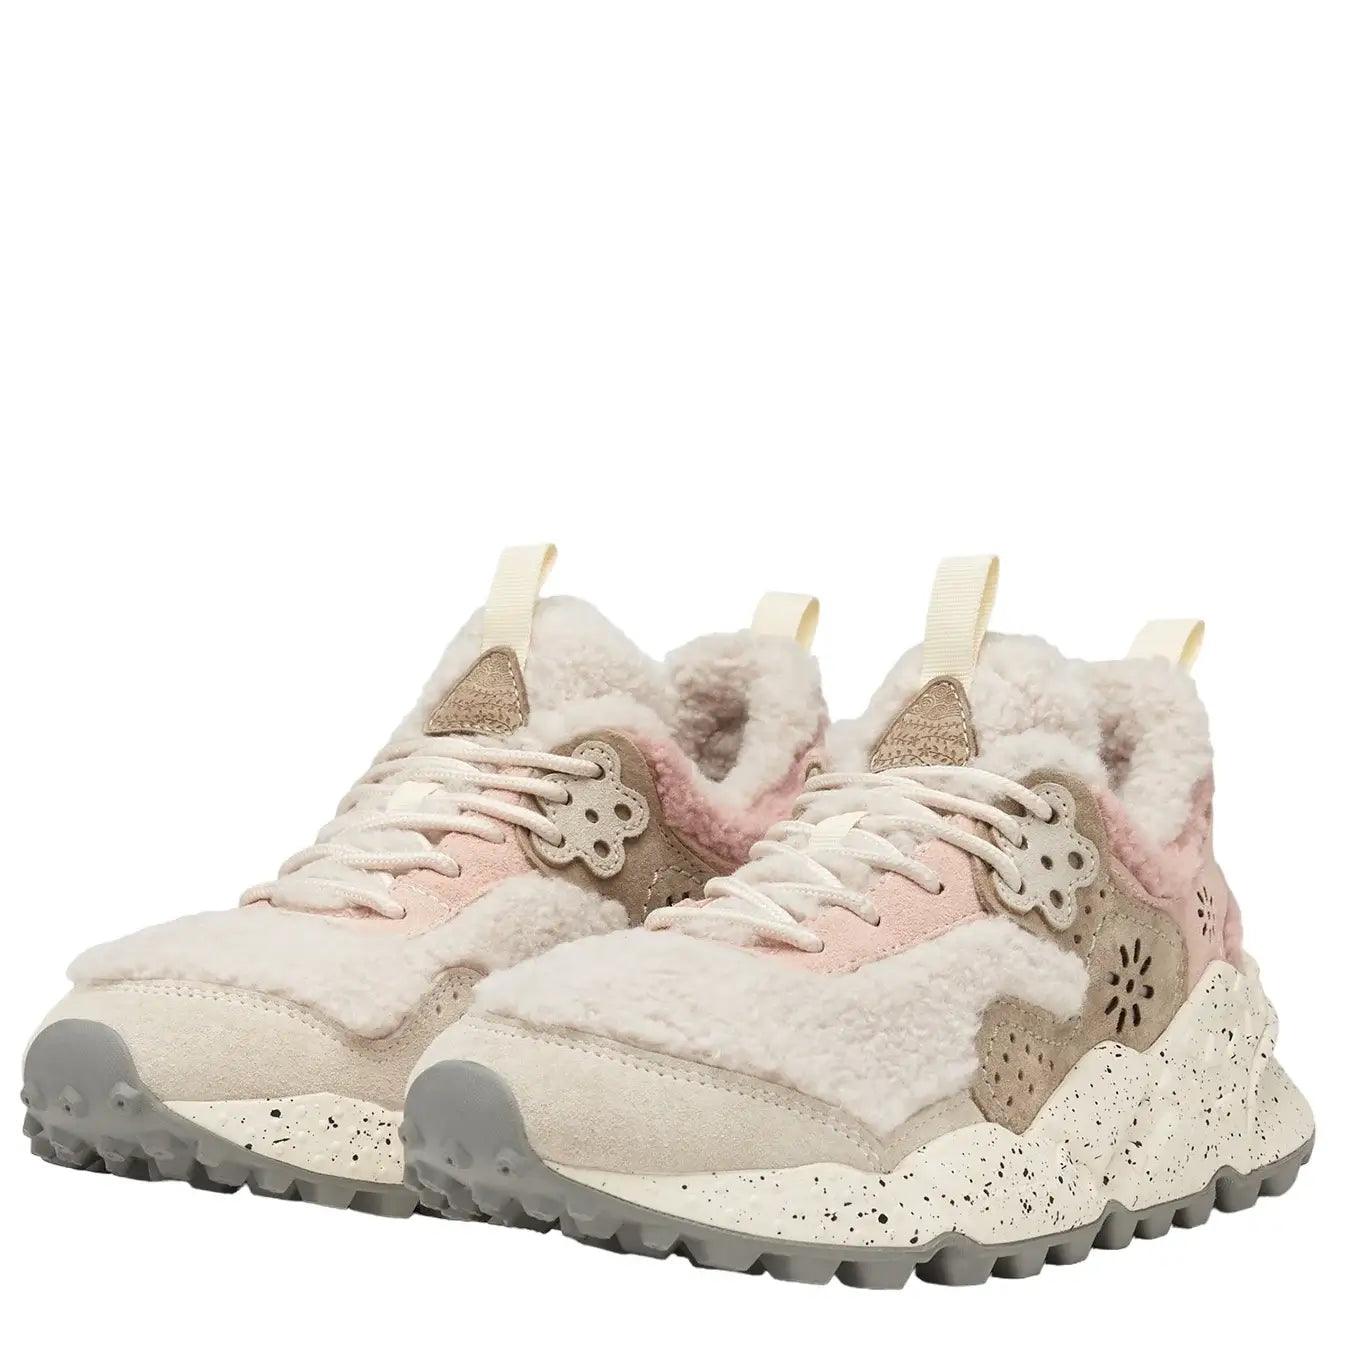 Flower m. Sneakers, 1n04, Kotetsu Suede Teddy, White Pink, Bassiniboutique.it, 2023 a/i